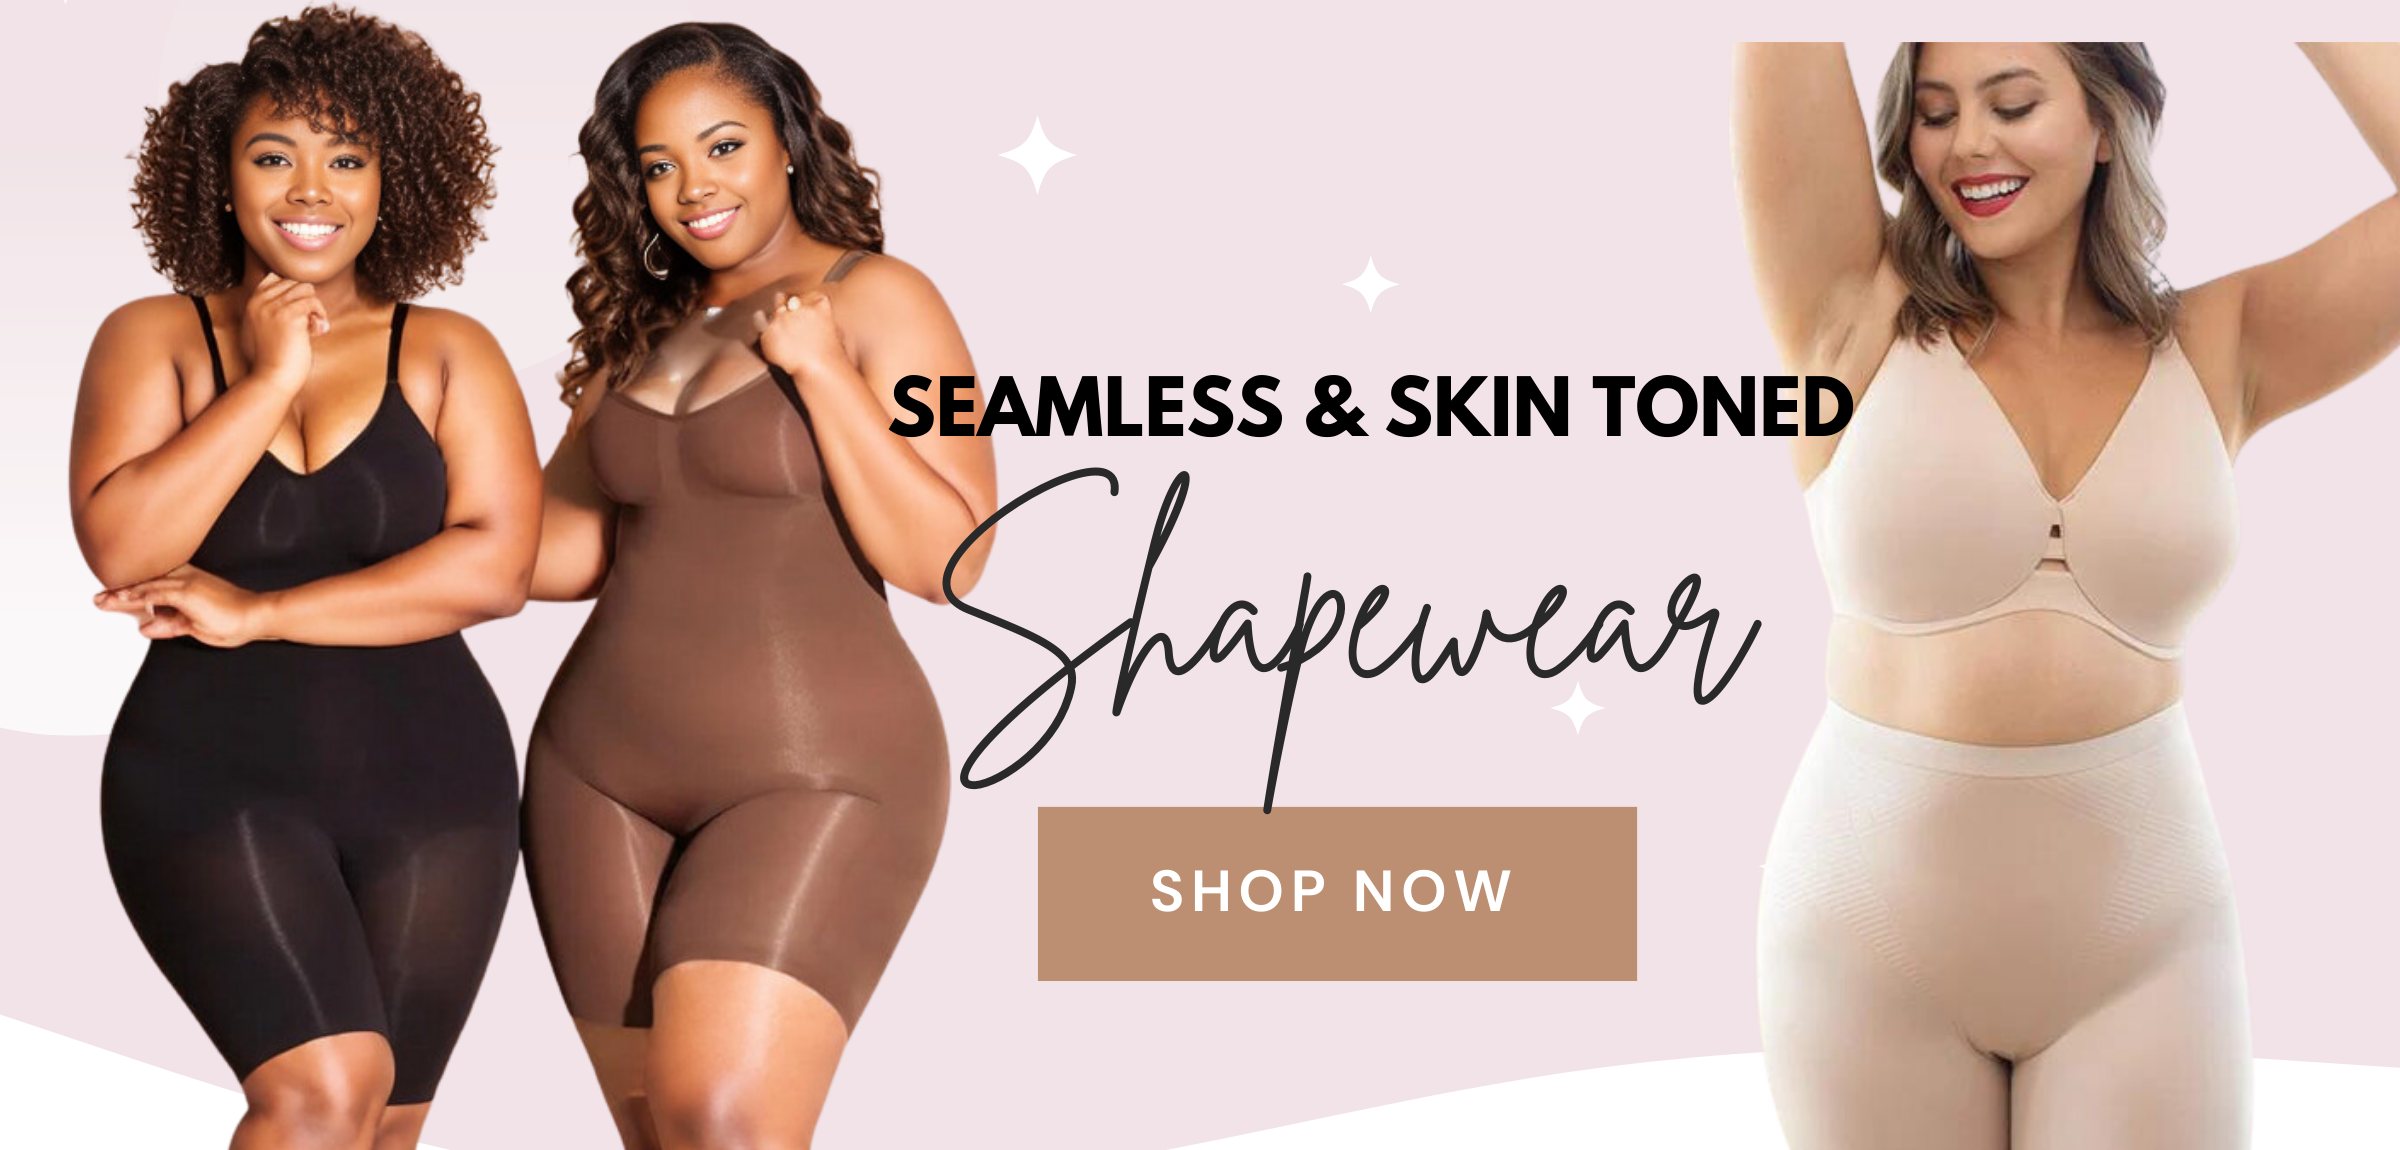 Killercurvybody - Killer curves queen all snatched with